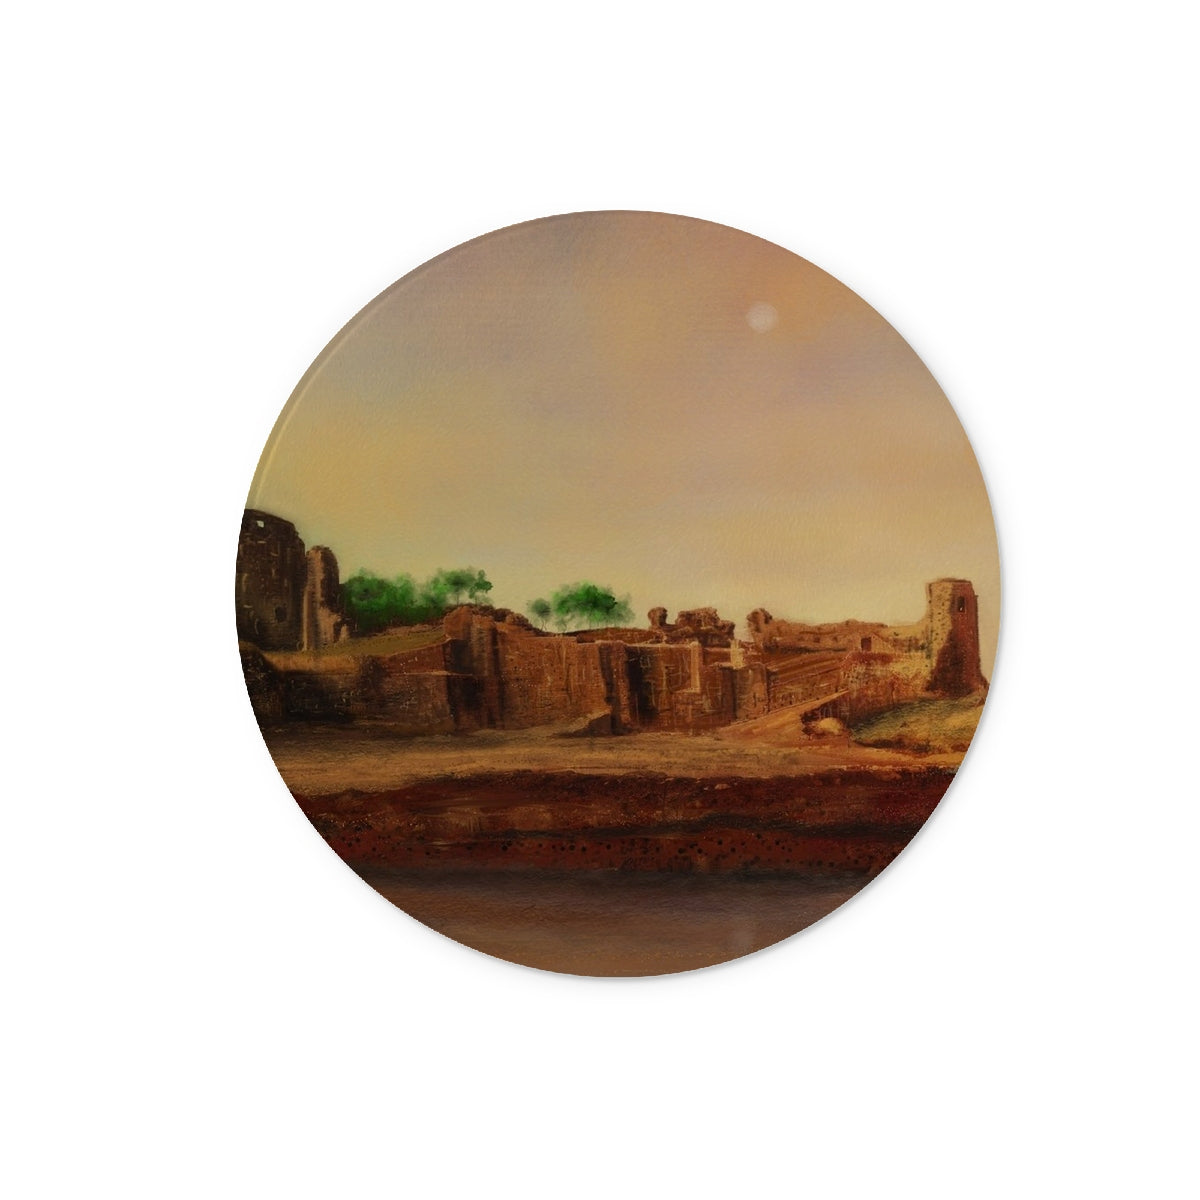 St Andrews Castle Art Gifts Glass Chopping Board-Glass Chopping Boards-Historic & Iconic Scotland Art Gallery-12" Round-Paintings, Prints, Homeware, Art Gifts From Scotland By Scottish Artist Kevin Hunter